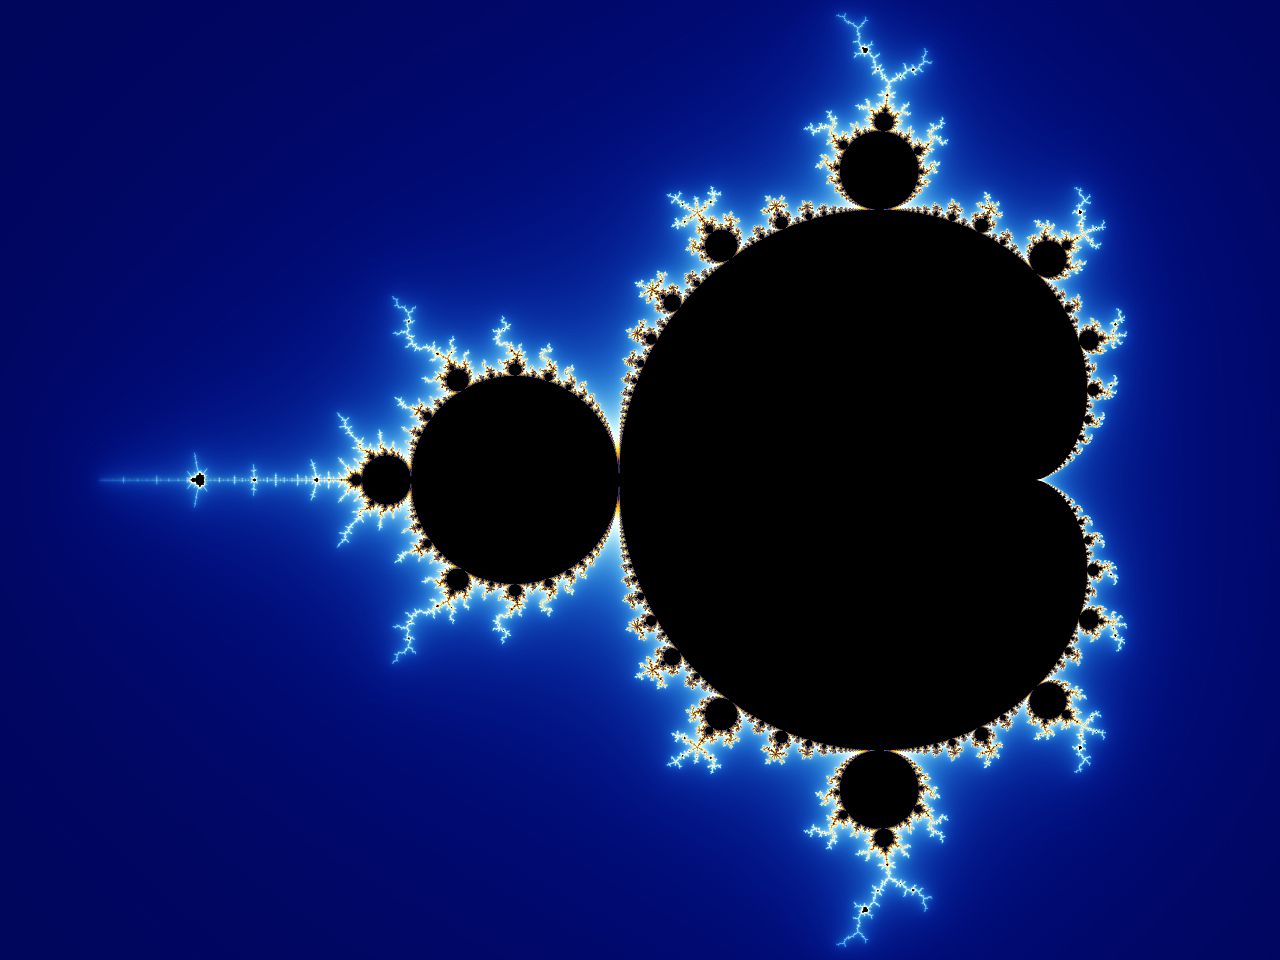 Exploring the World of Complex Fractals: Generating and Rendering Mandelbrot, Julia, and Burning Ship Sets using Python